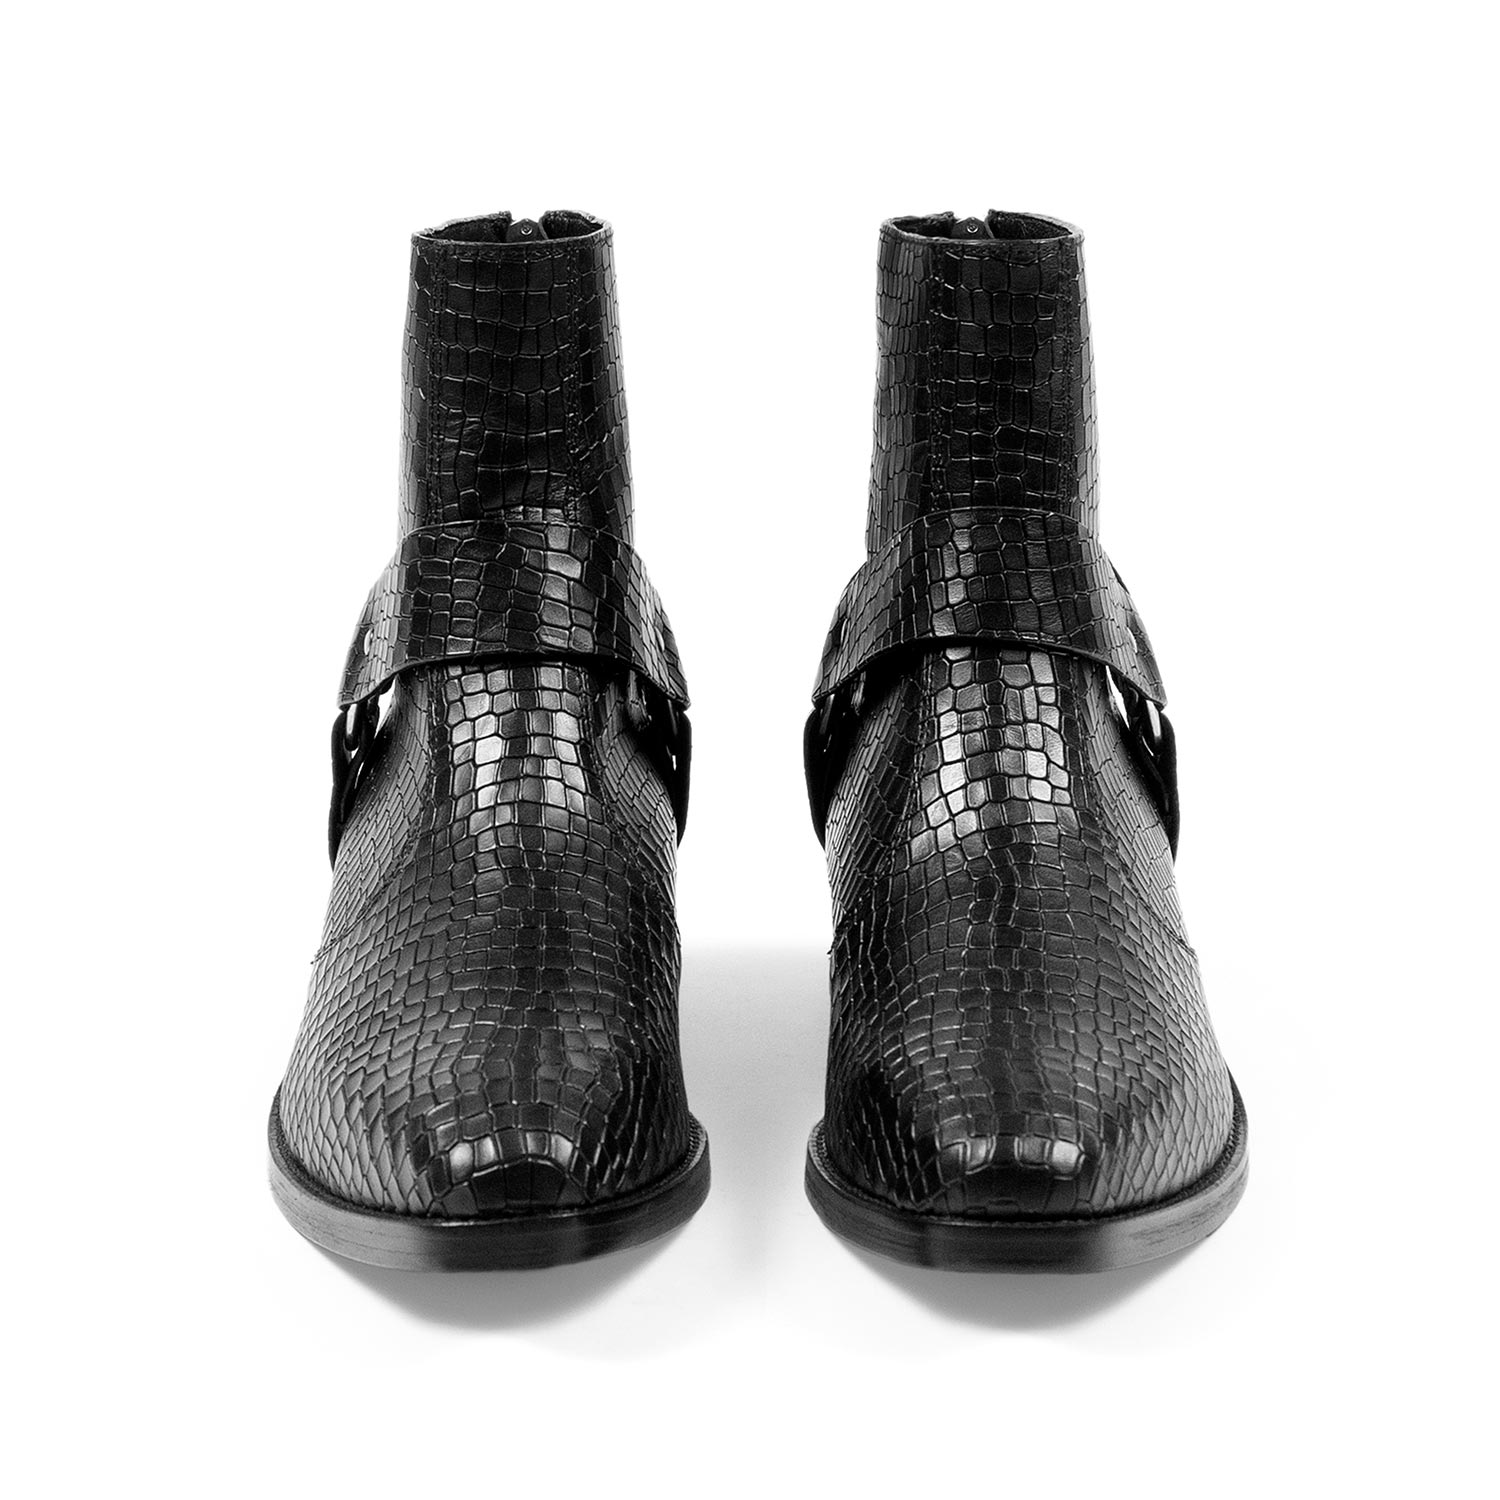 Libertine - Black Snakeskin Leather Harness Boots | Straight To Hell ...